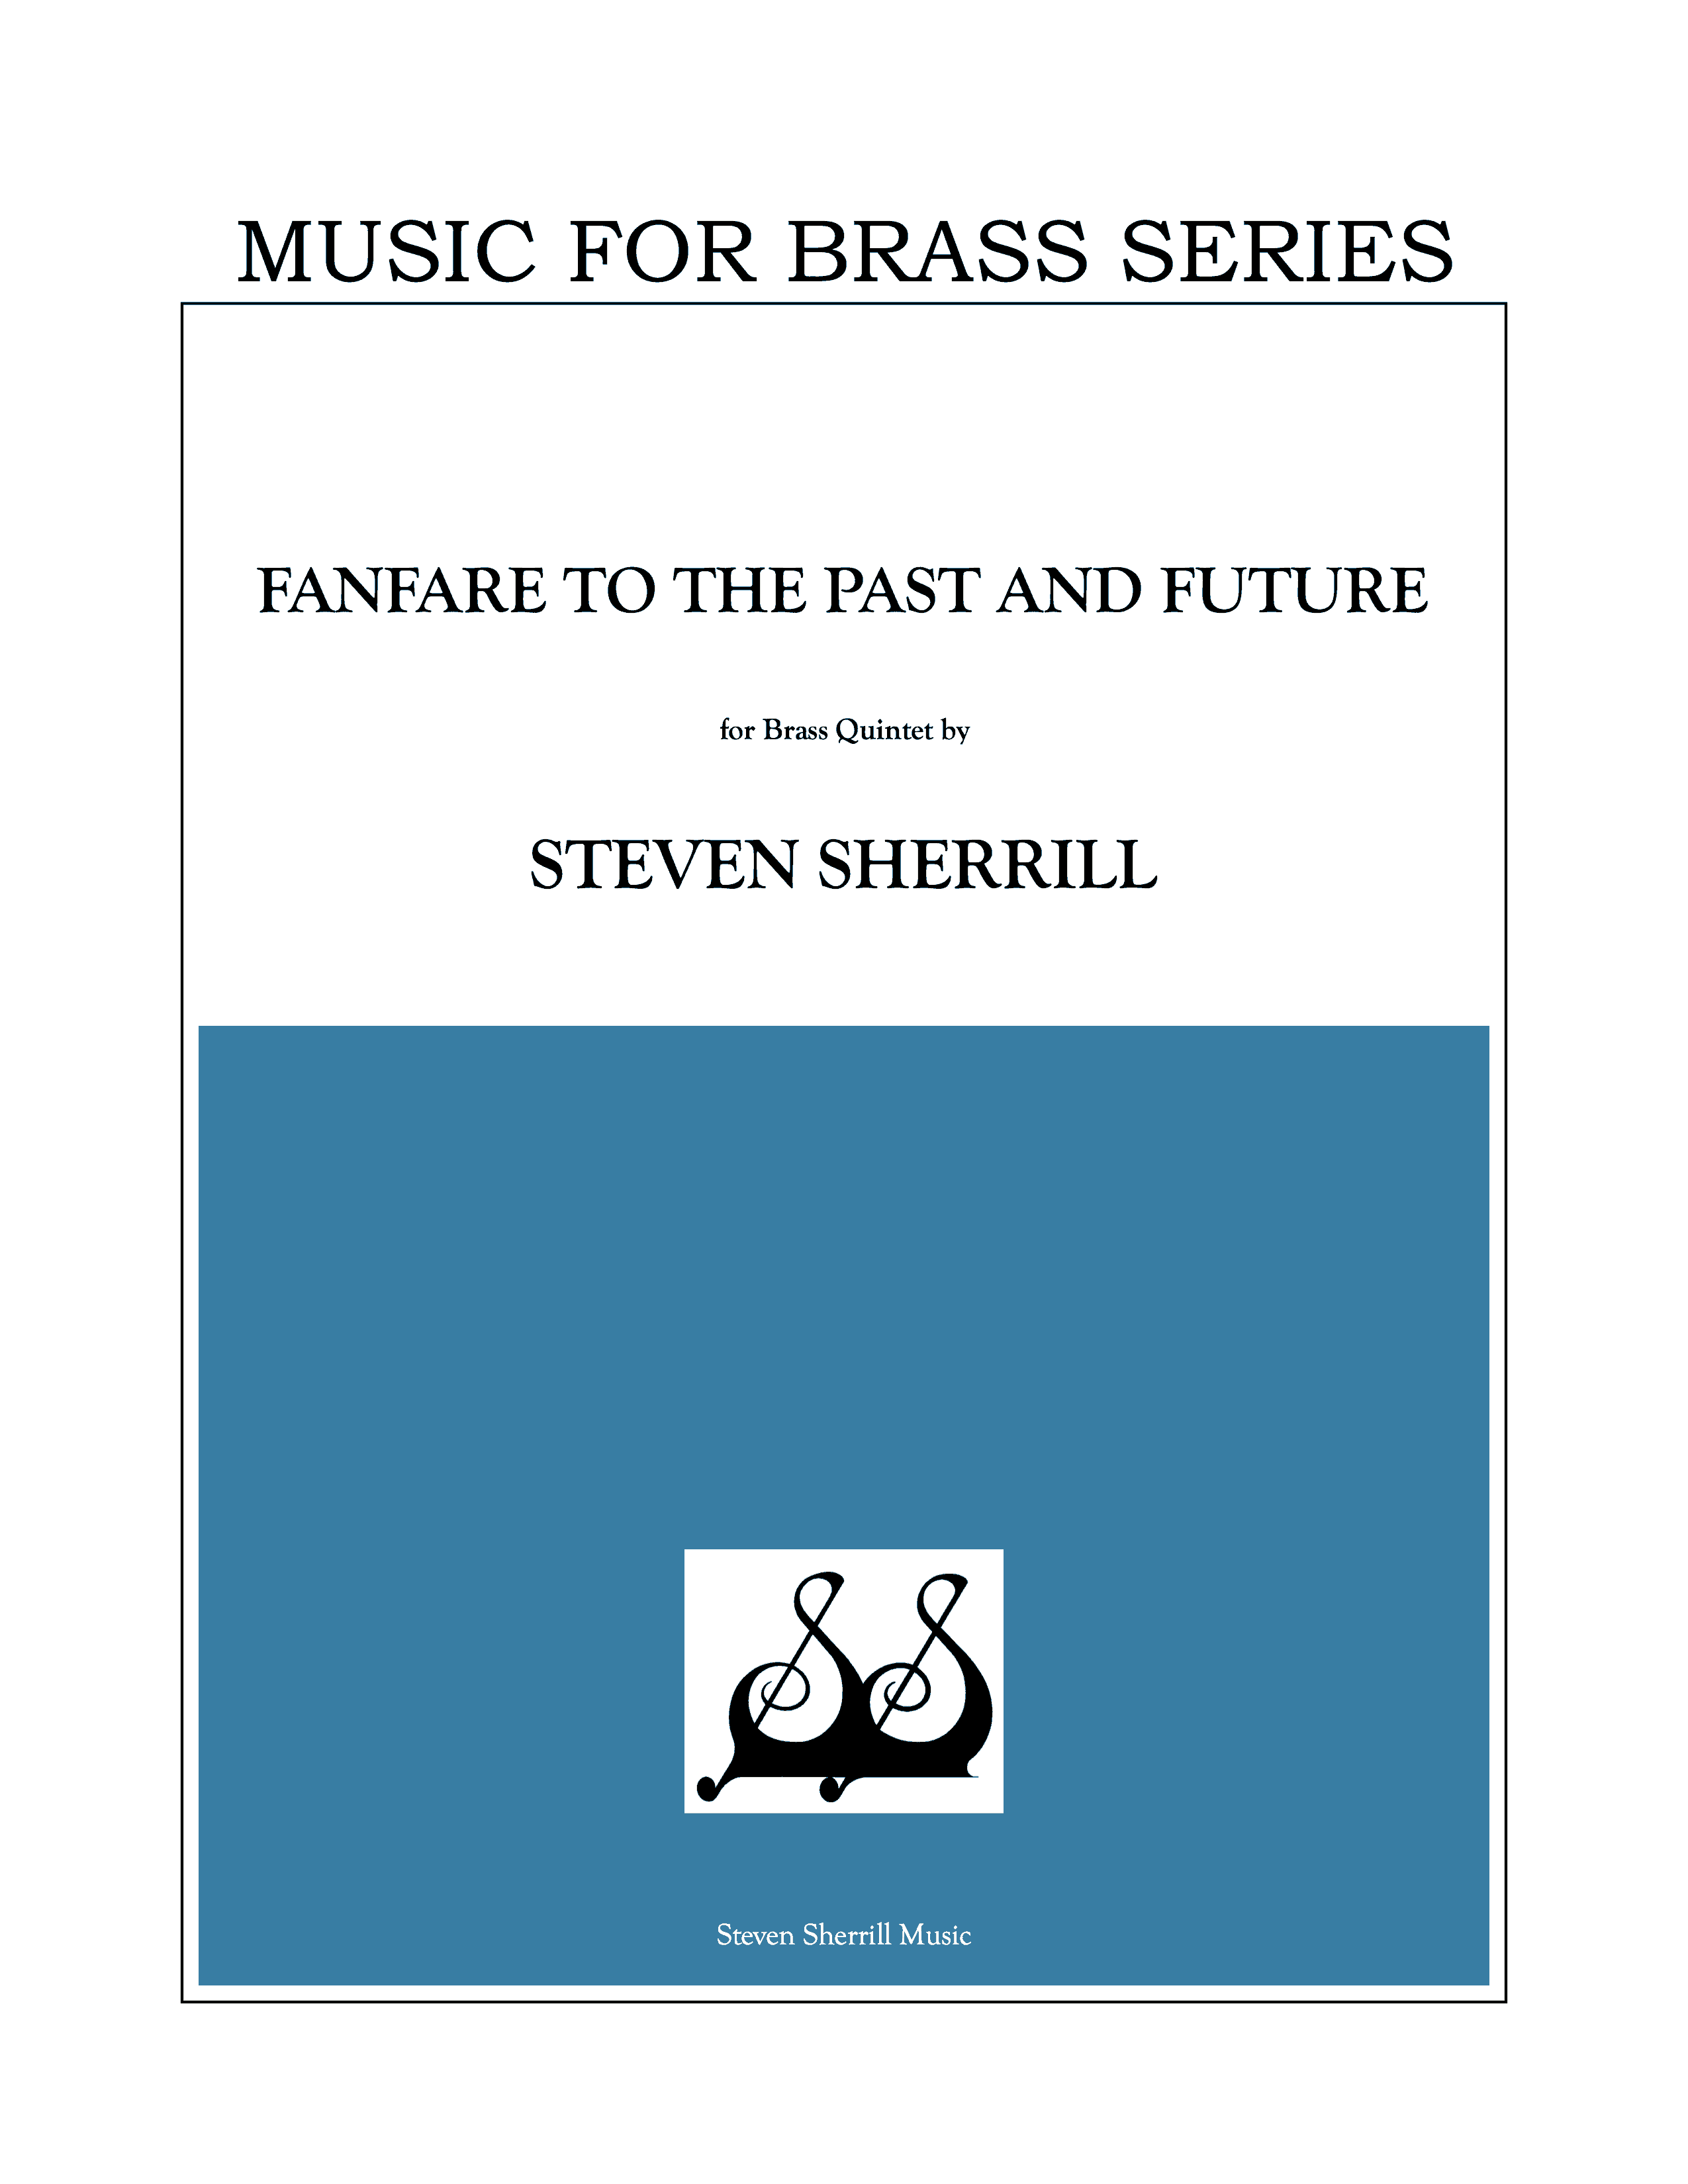 Fanfare to the Past and Future cover page